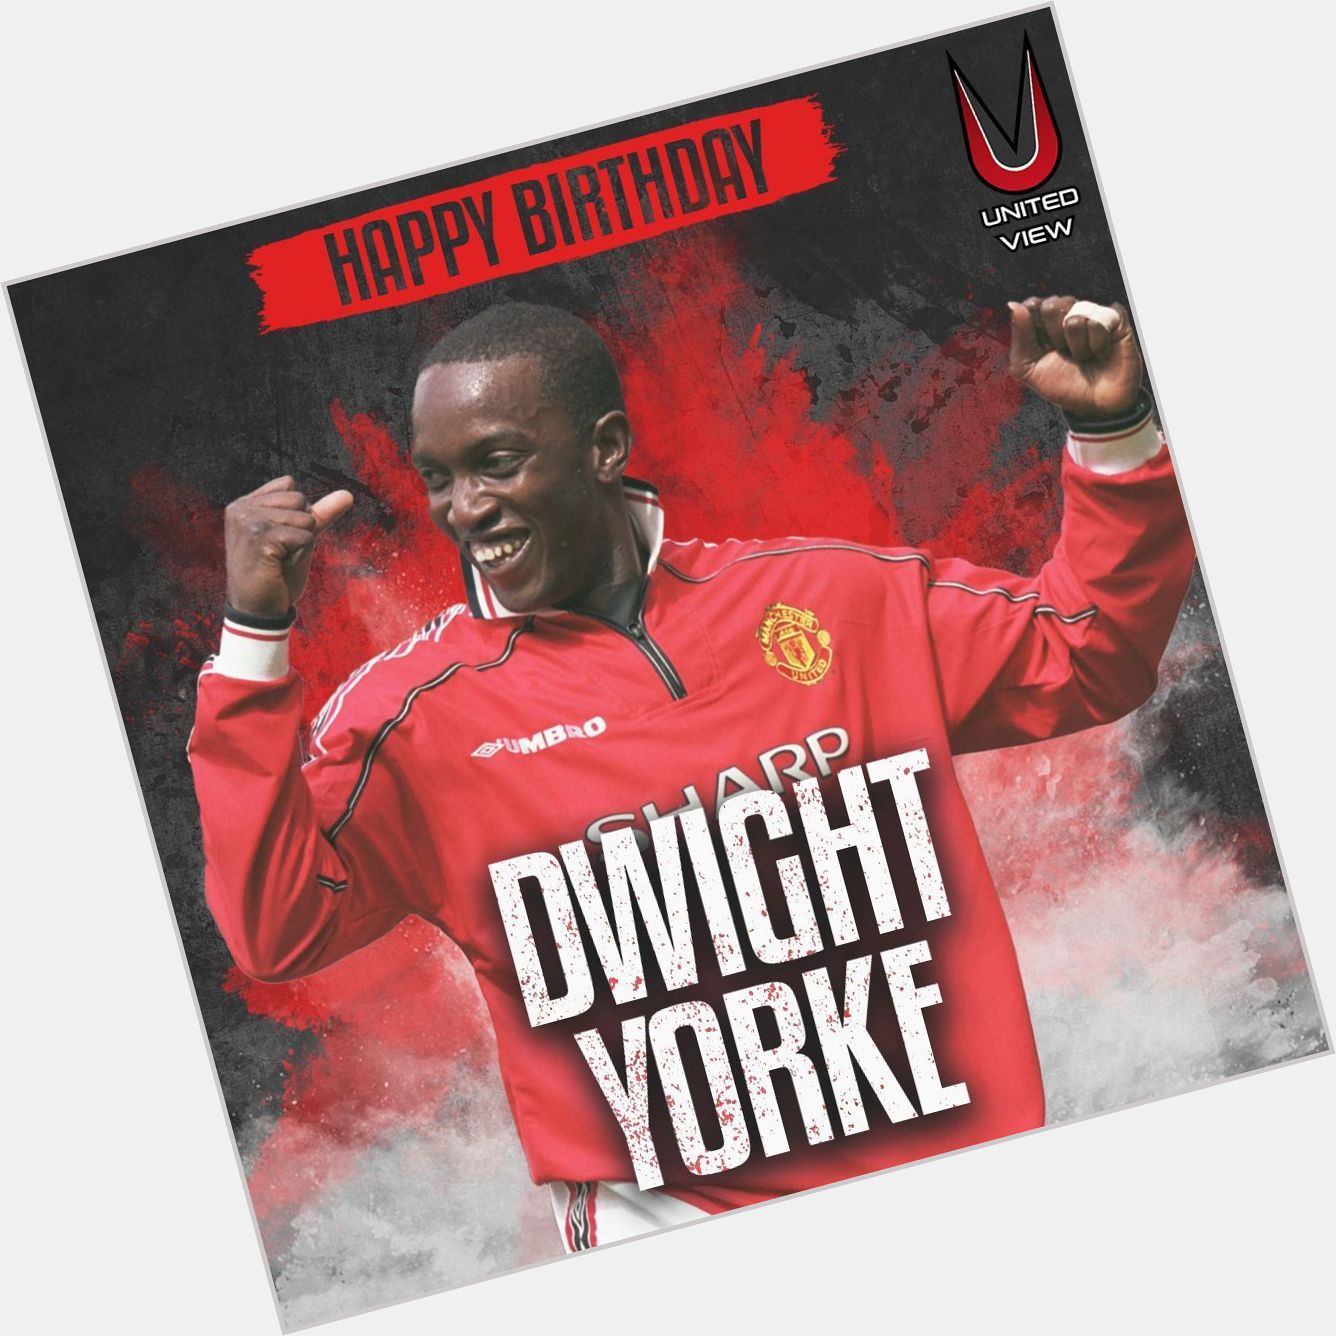 Happy Birthday to Dwight Yorke!

The former Manchester United striker turns 50 years old today.  